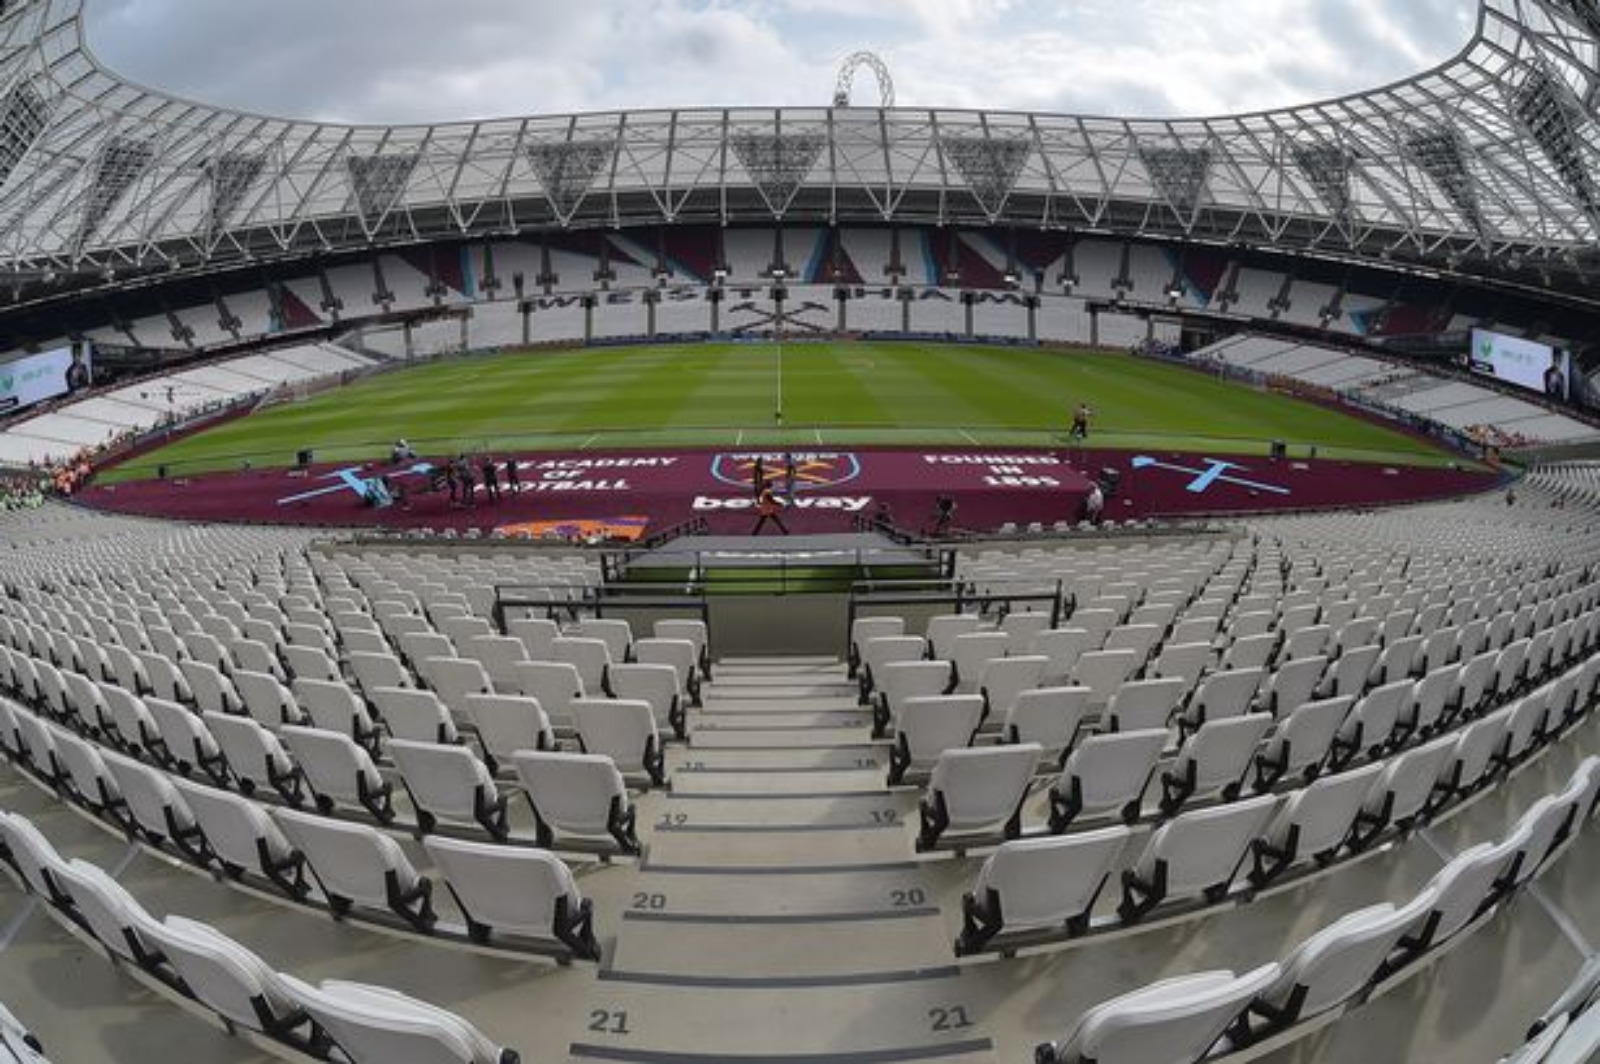 Olympic Park to Build Perimeter Fence to Discourage Fans from Visiting on Matchdays